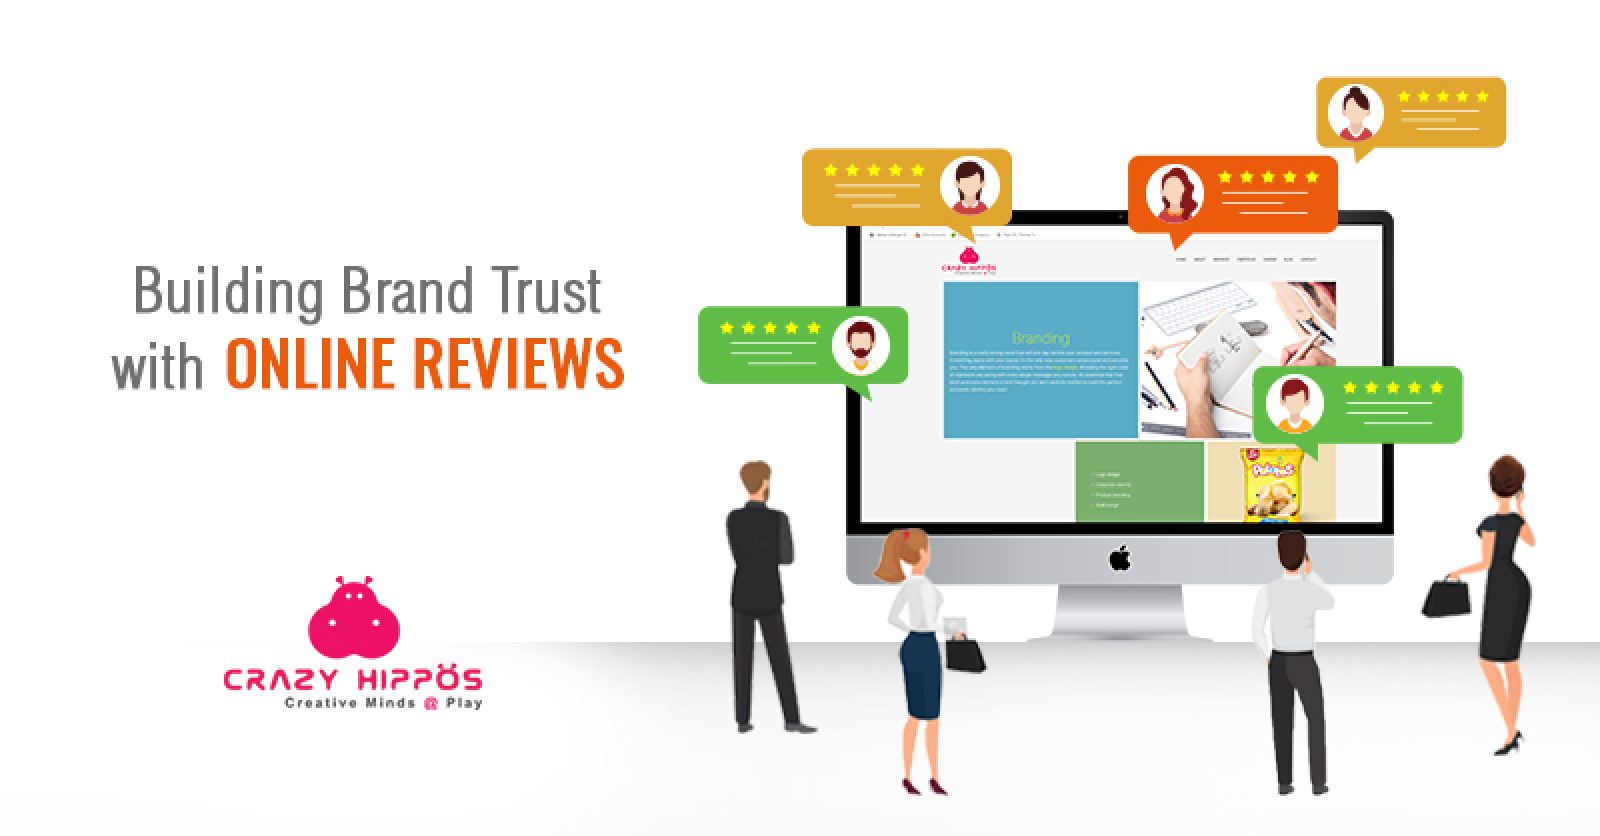 BUILDING BRAND TRUST WITH ONLINE REVIEWS